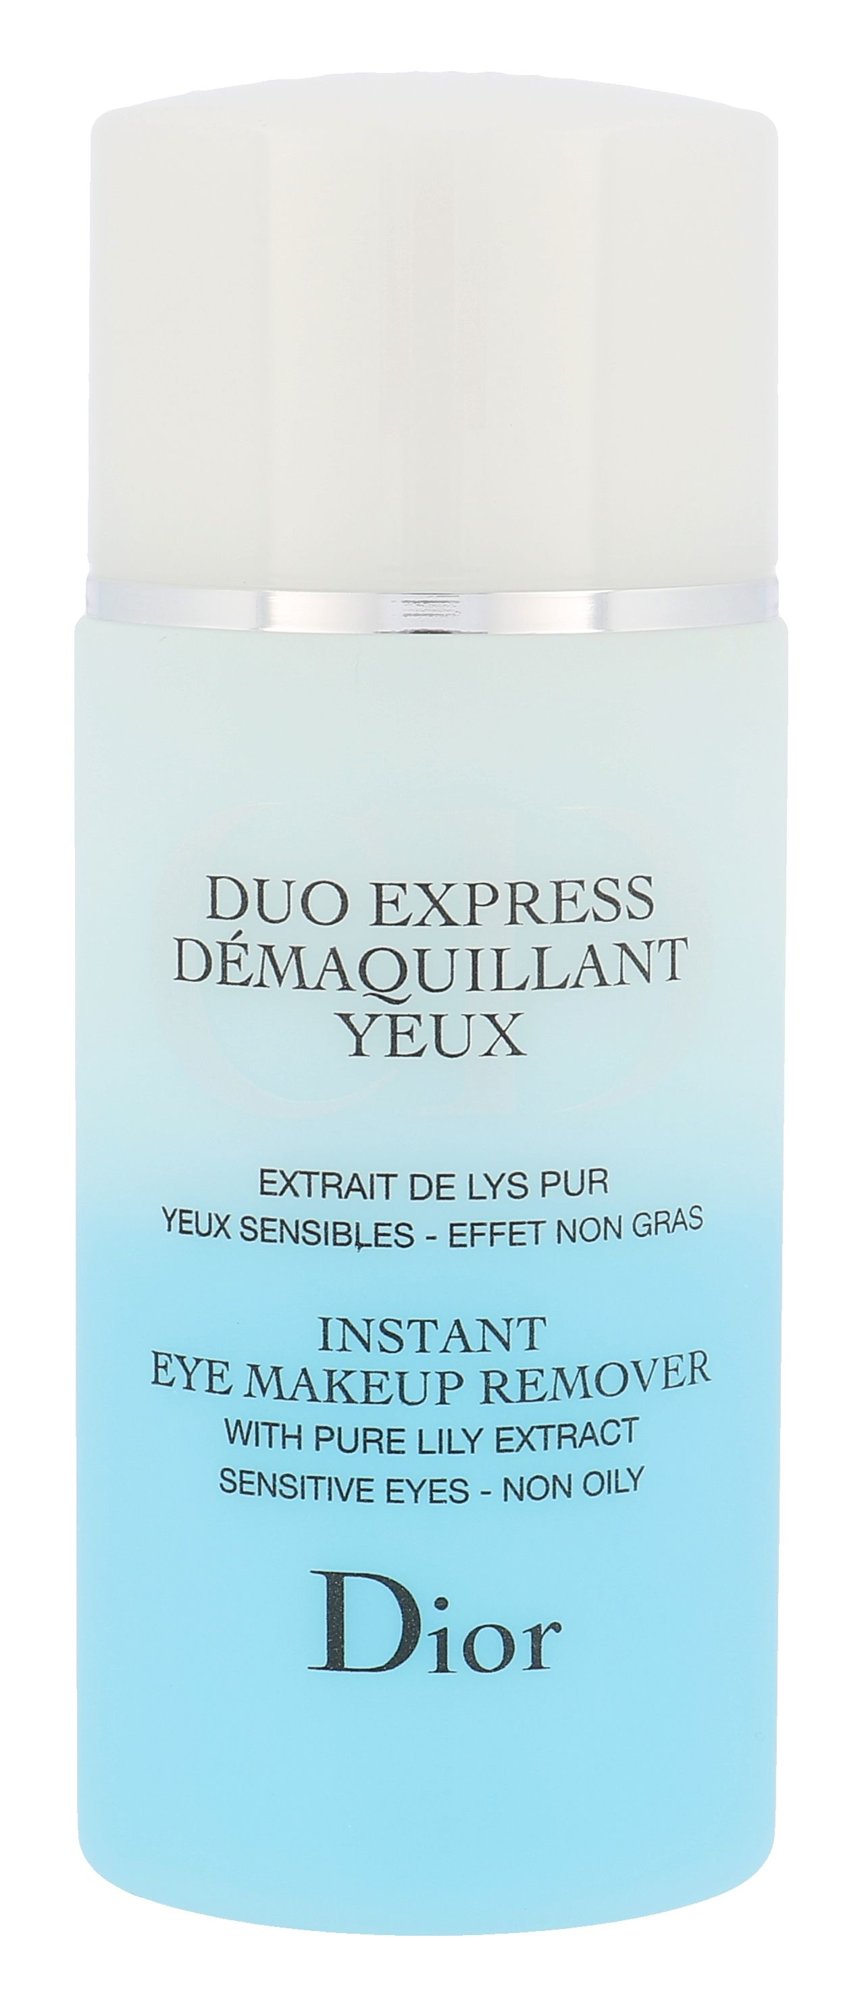 Christian Dior Magic Duophase Eye Makeup Remover